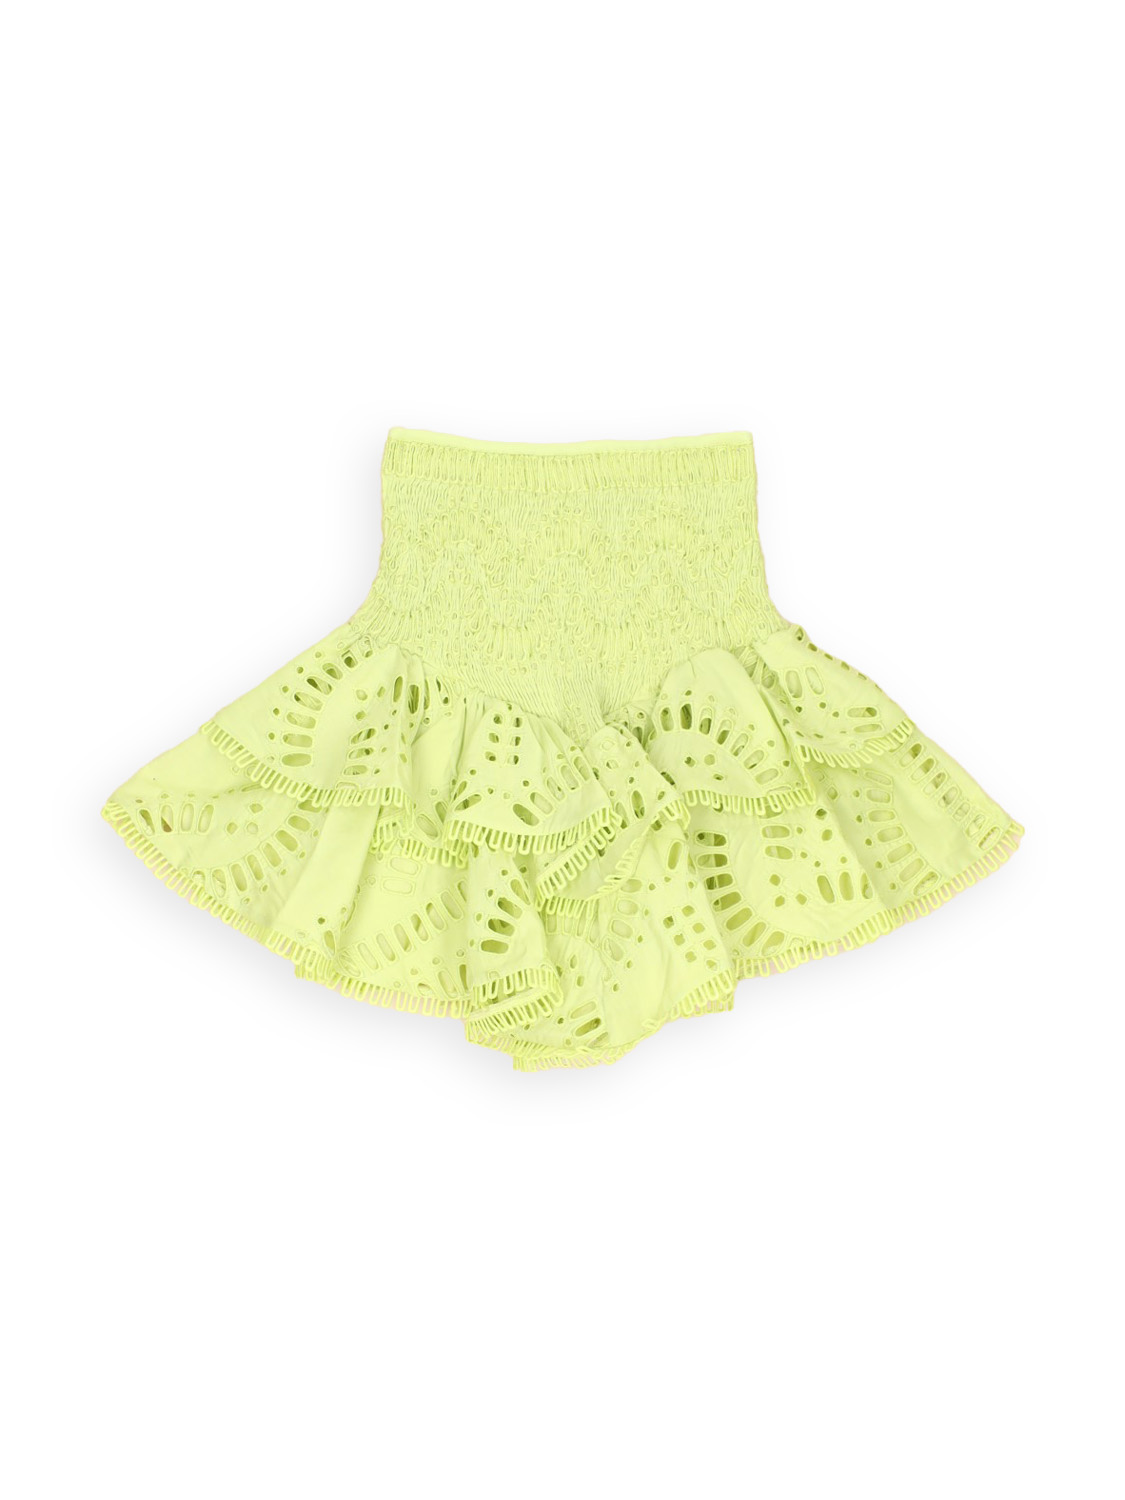 Charo Ruiz Mini skirt with embroidered hole pattern   green S